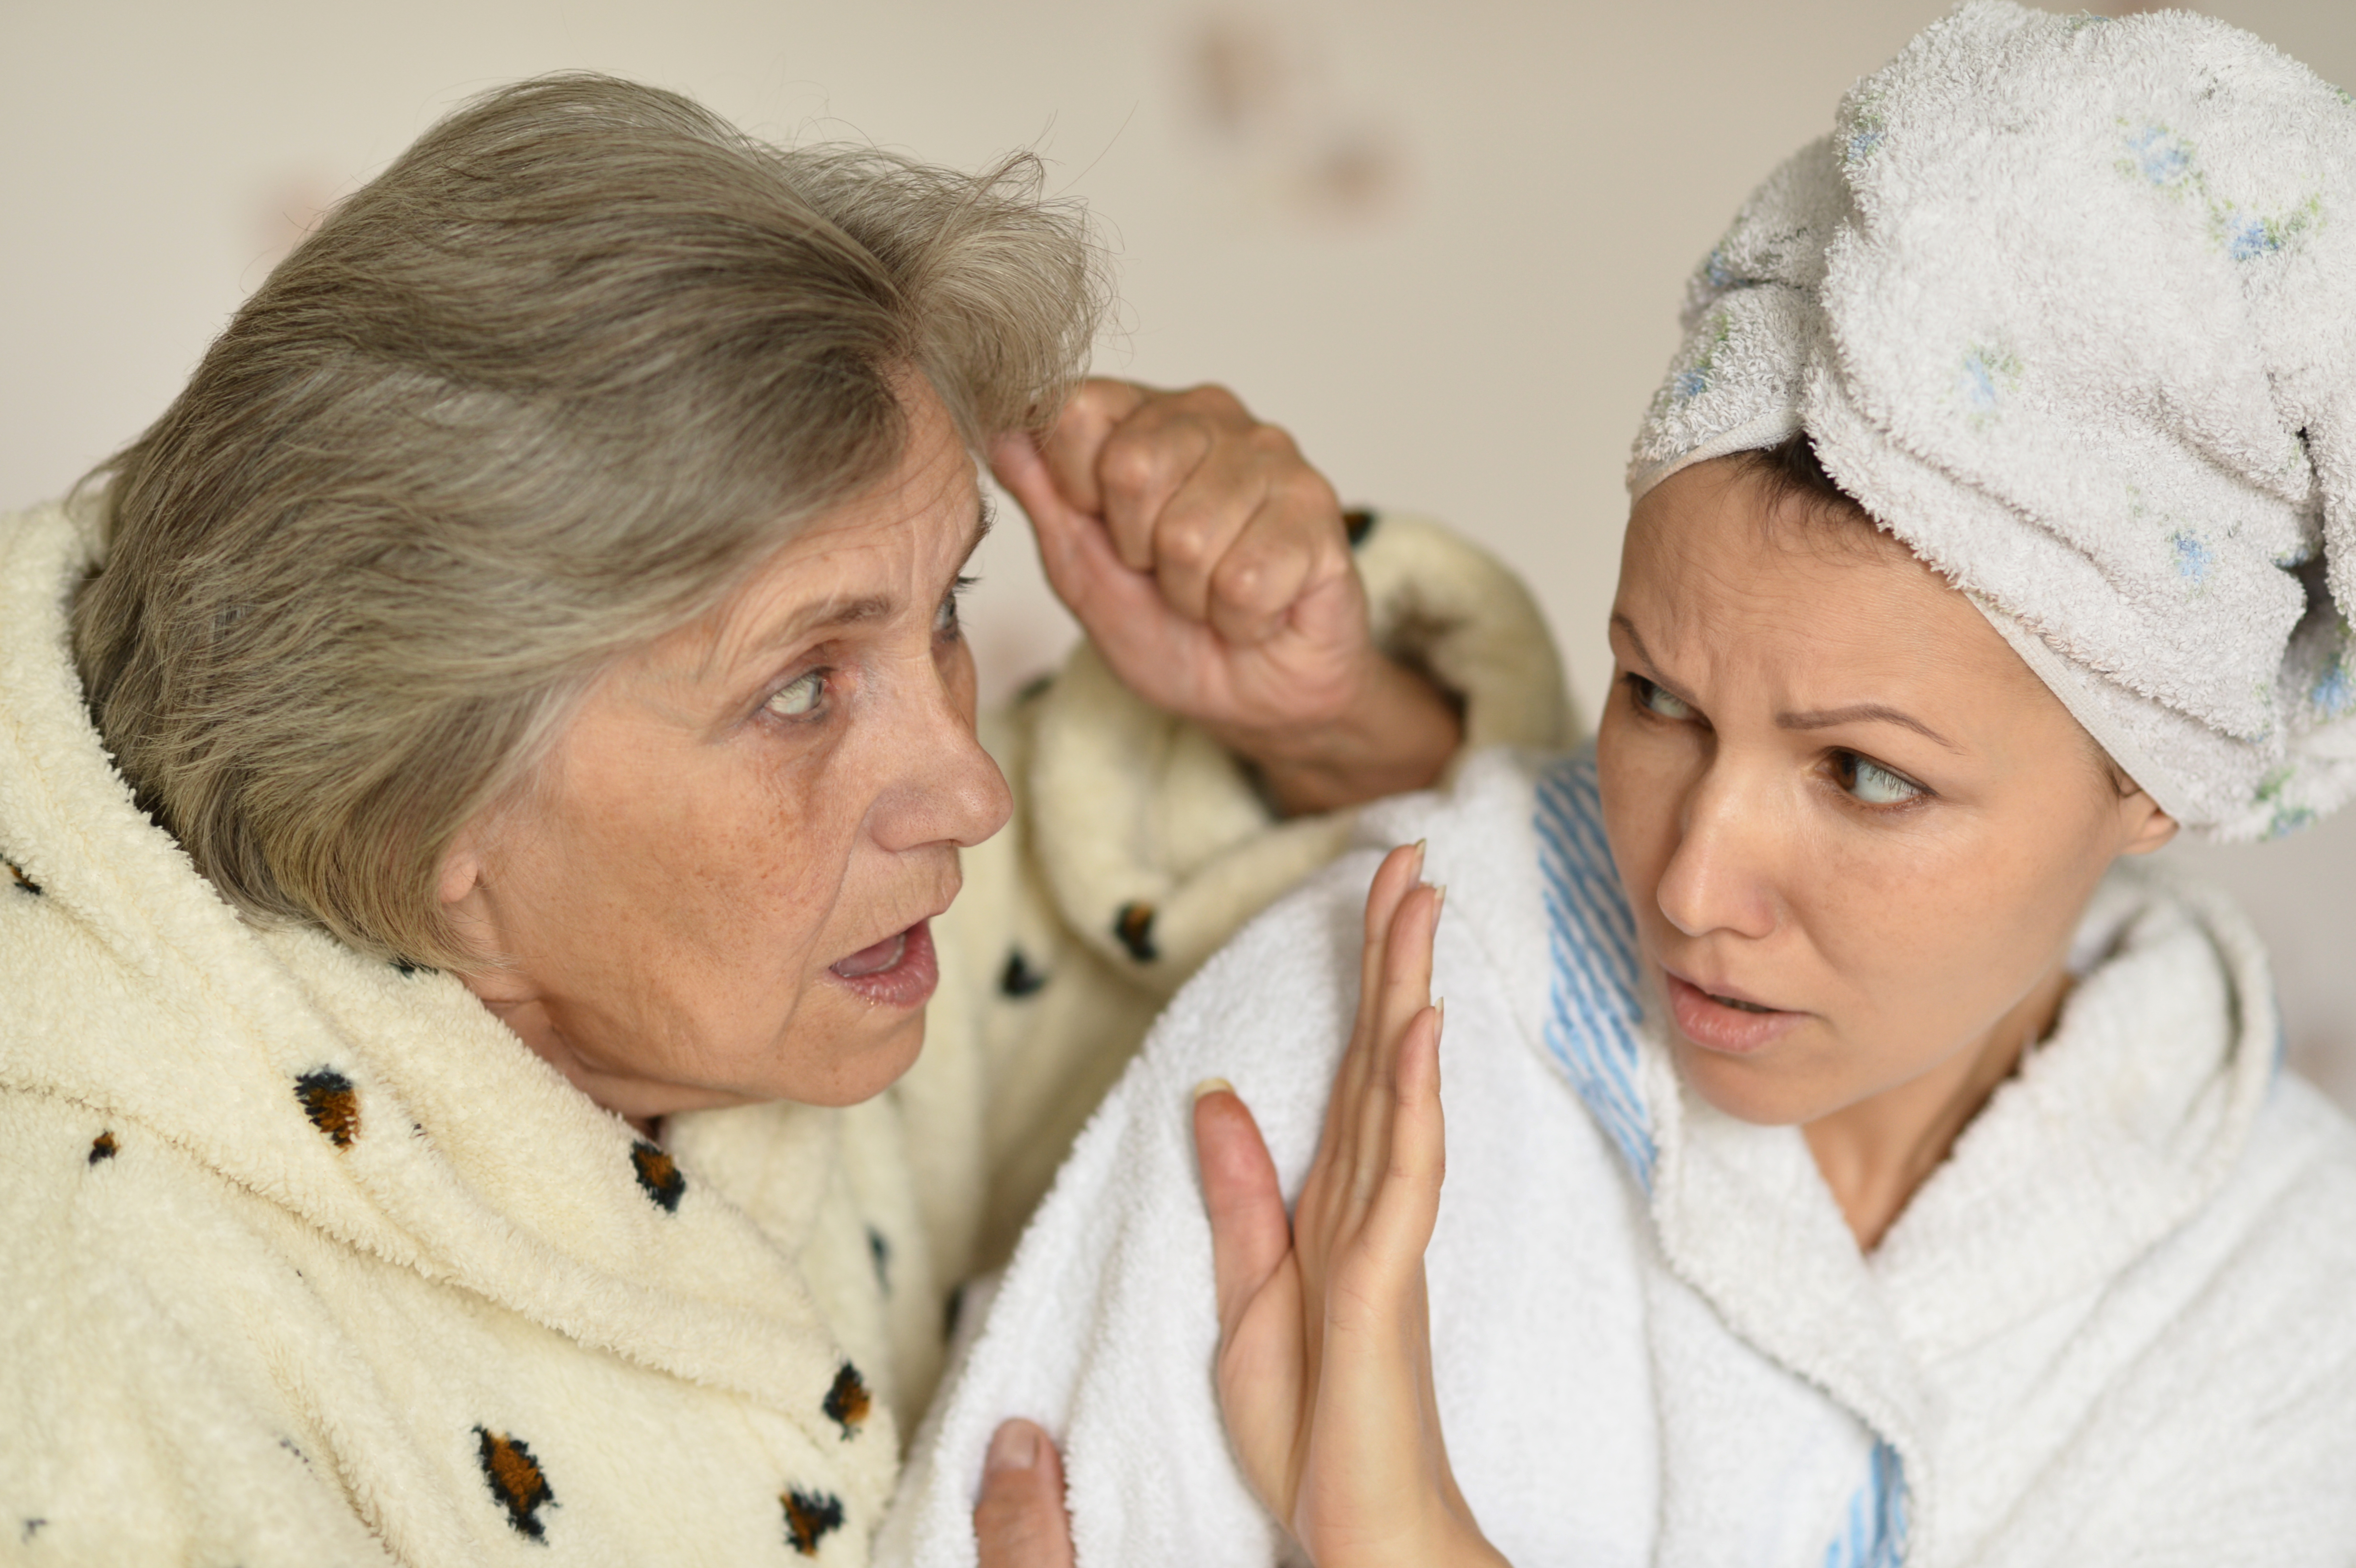 A pushy older lady and a younger woman | Source: Shutterstock